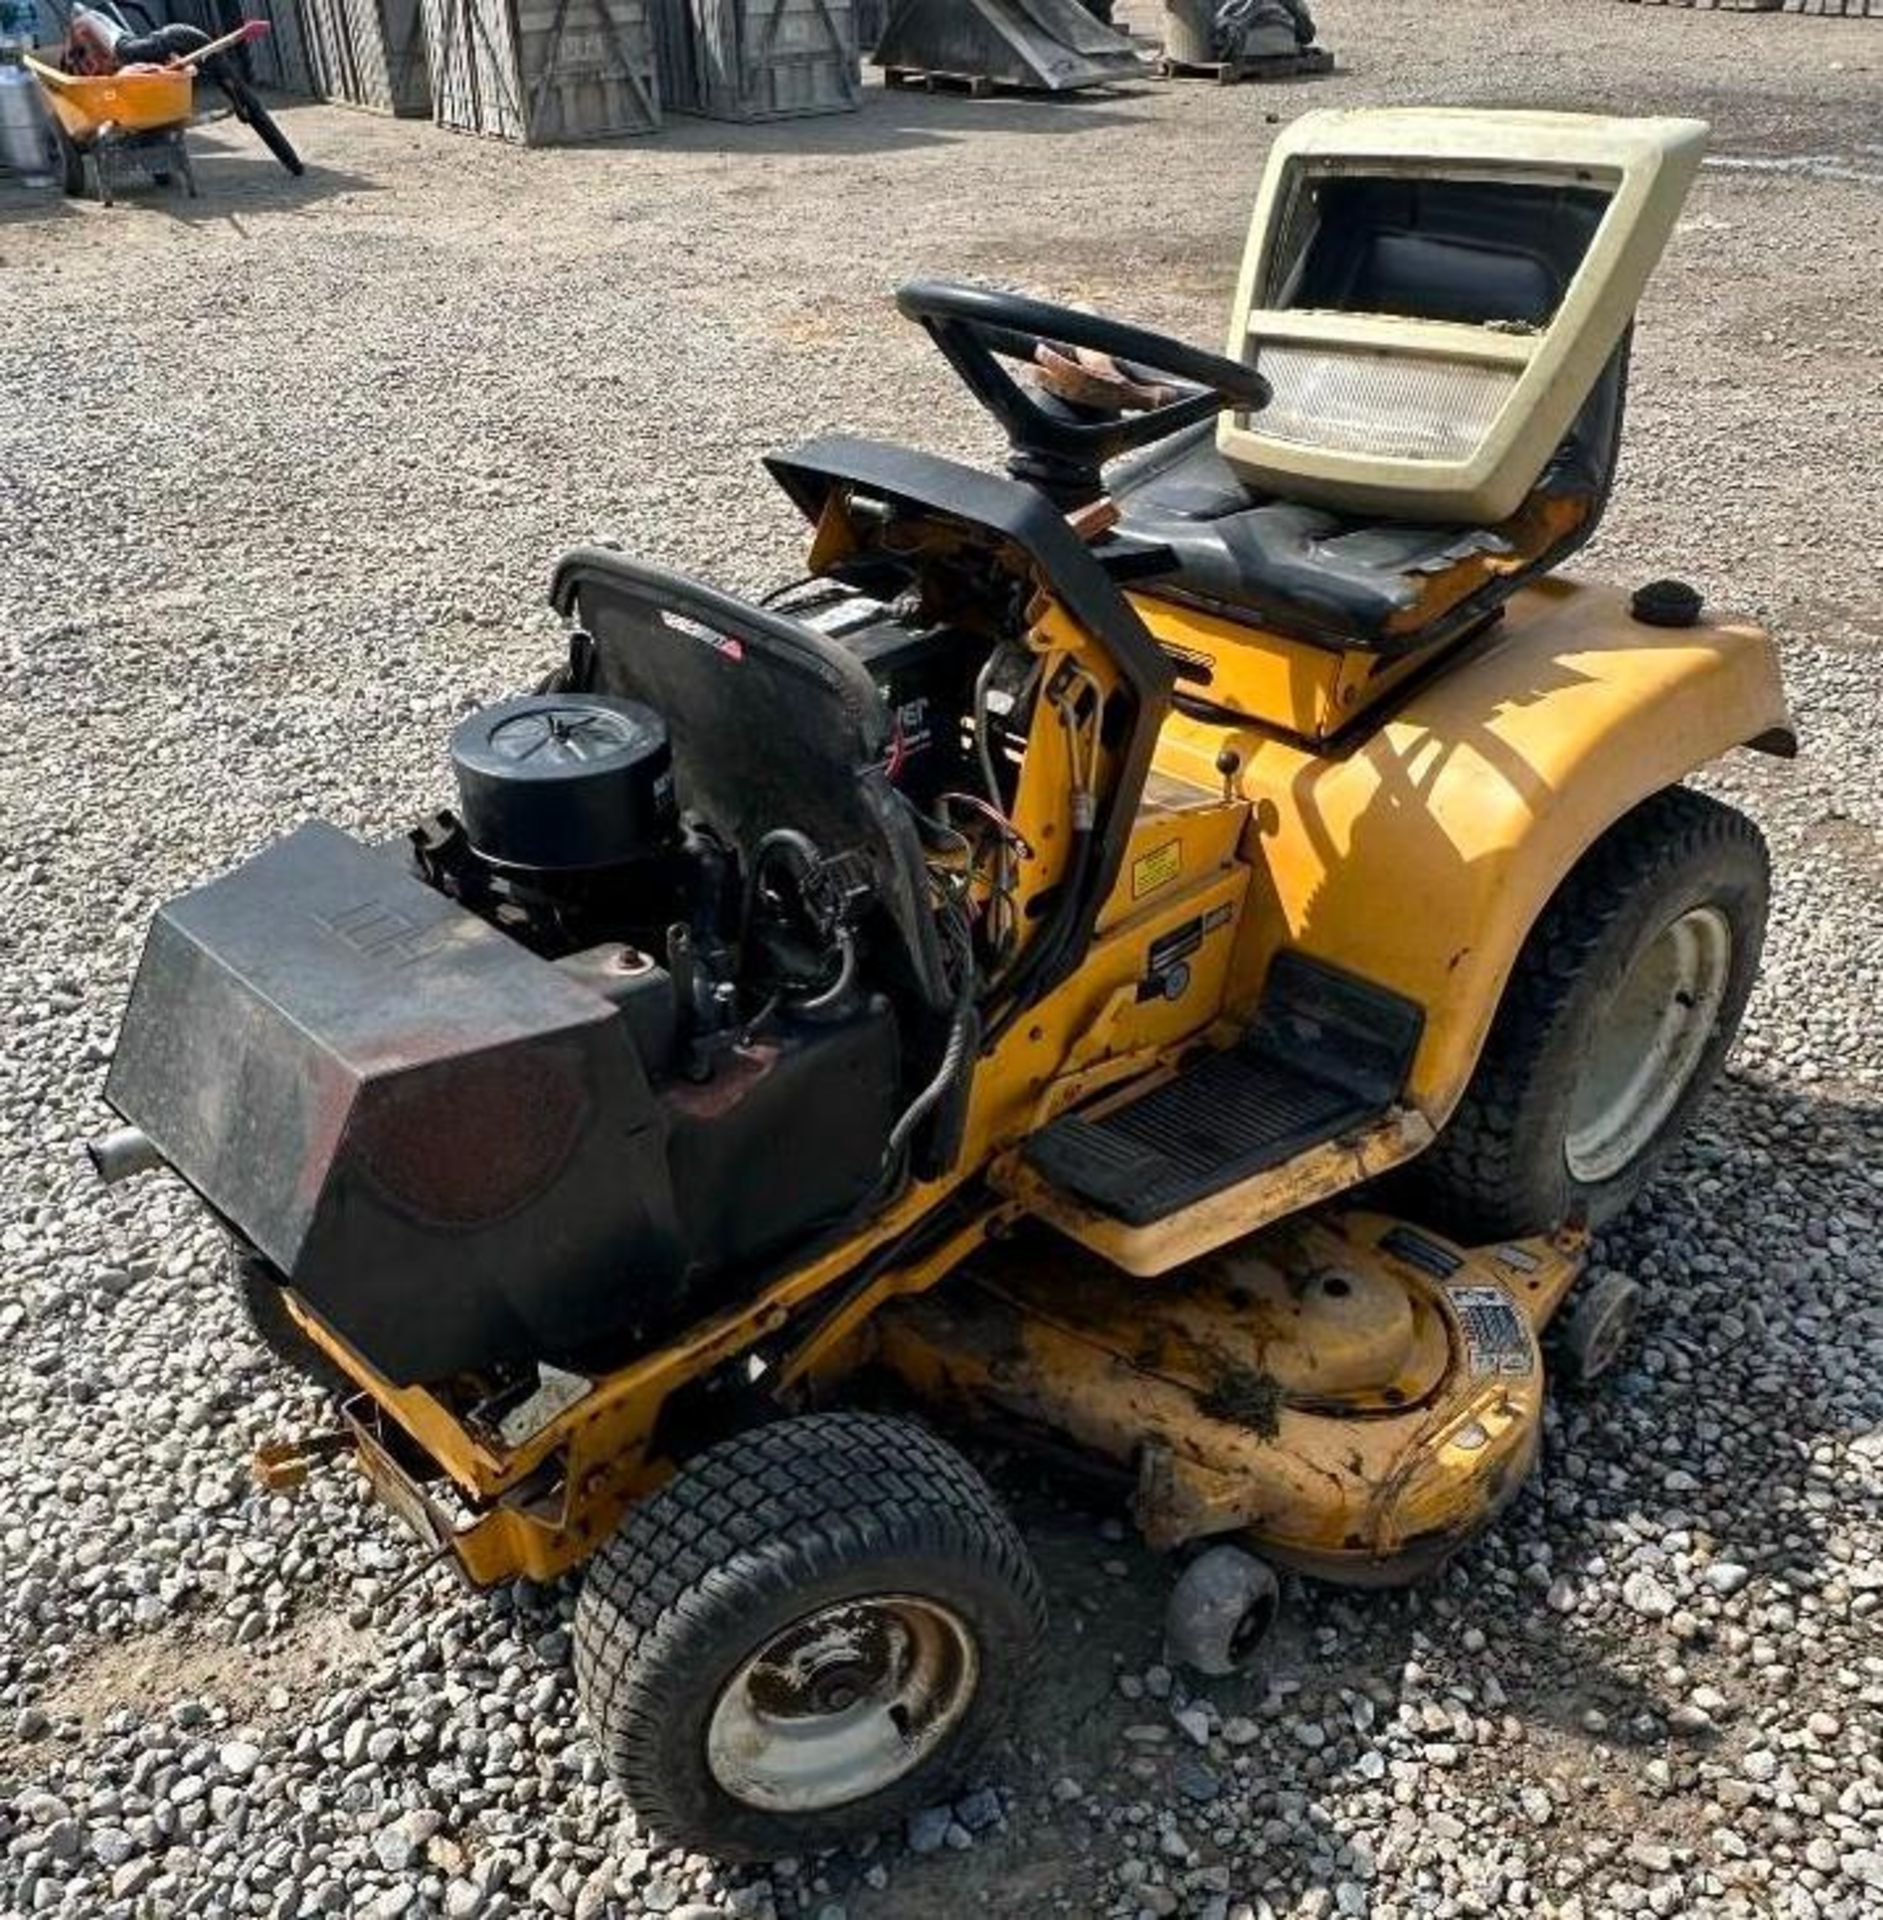 Cub Cadet lawn mower with 46" deck, runs and operates - Image 2 of 6